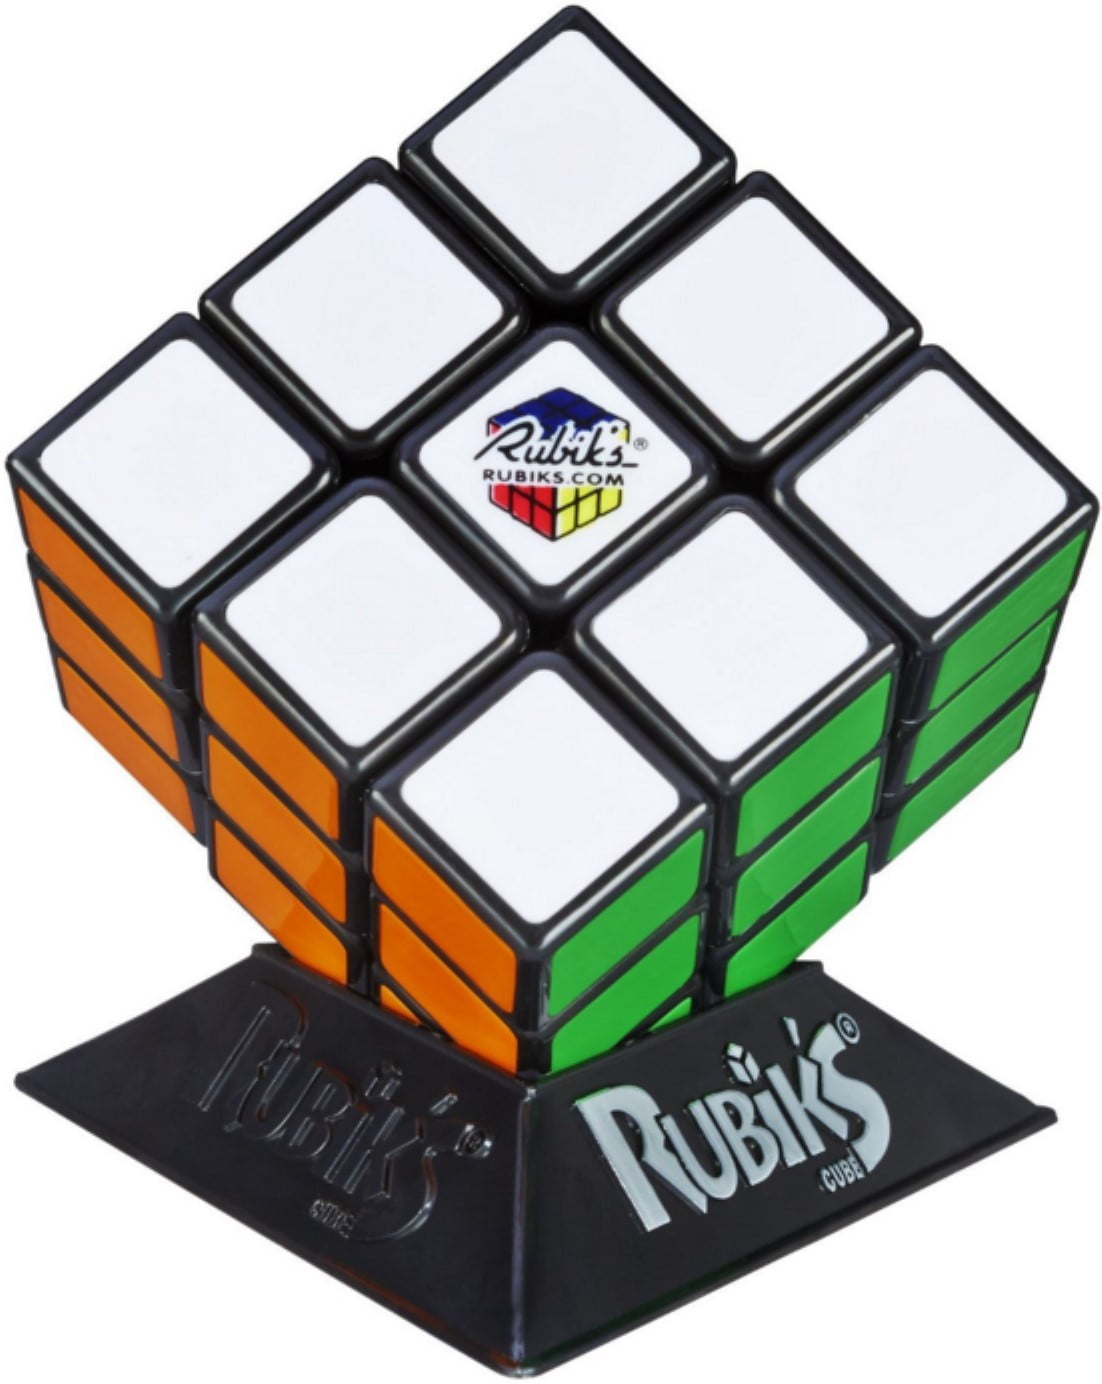 Rubik 3x3 Puzzle Cube Game With Stand Rubik's Hasbro Toy Original for sale online 